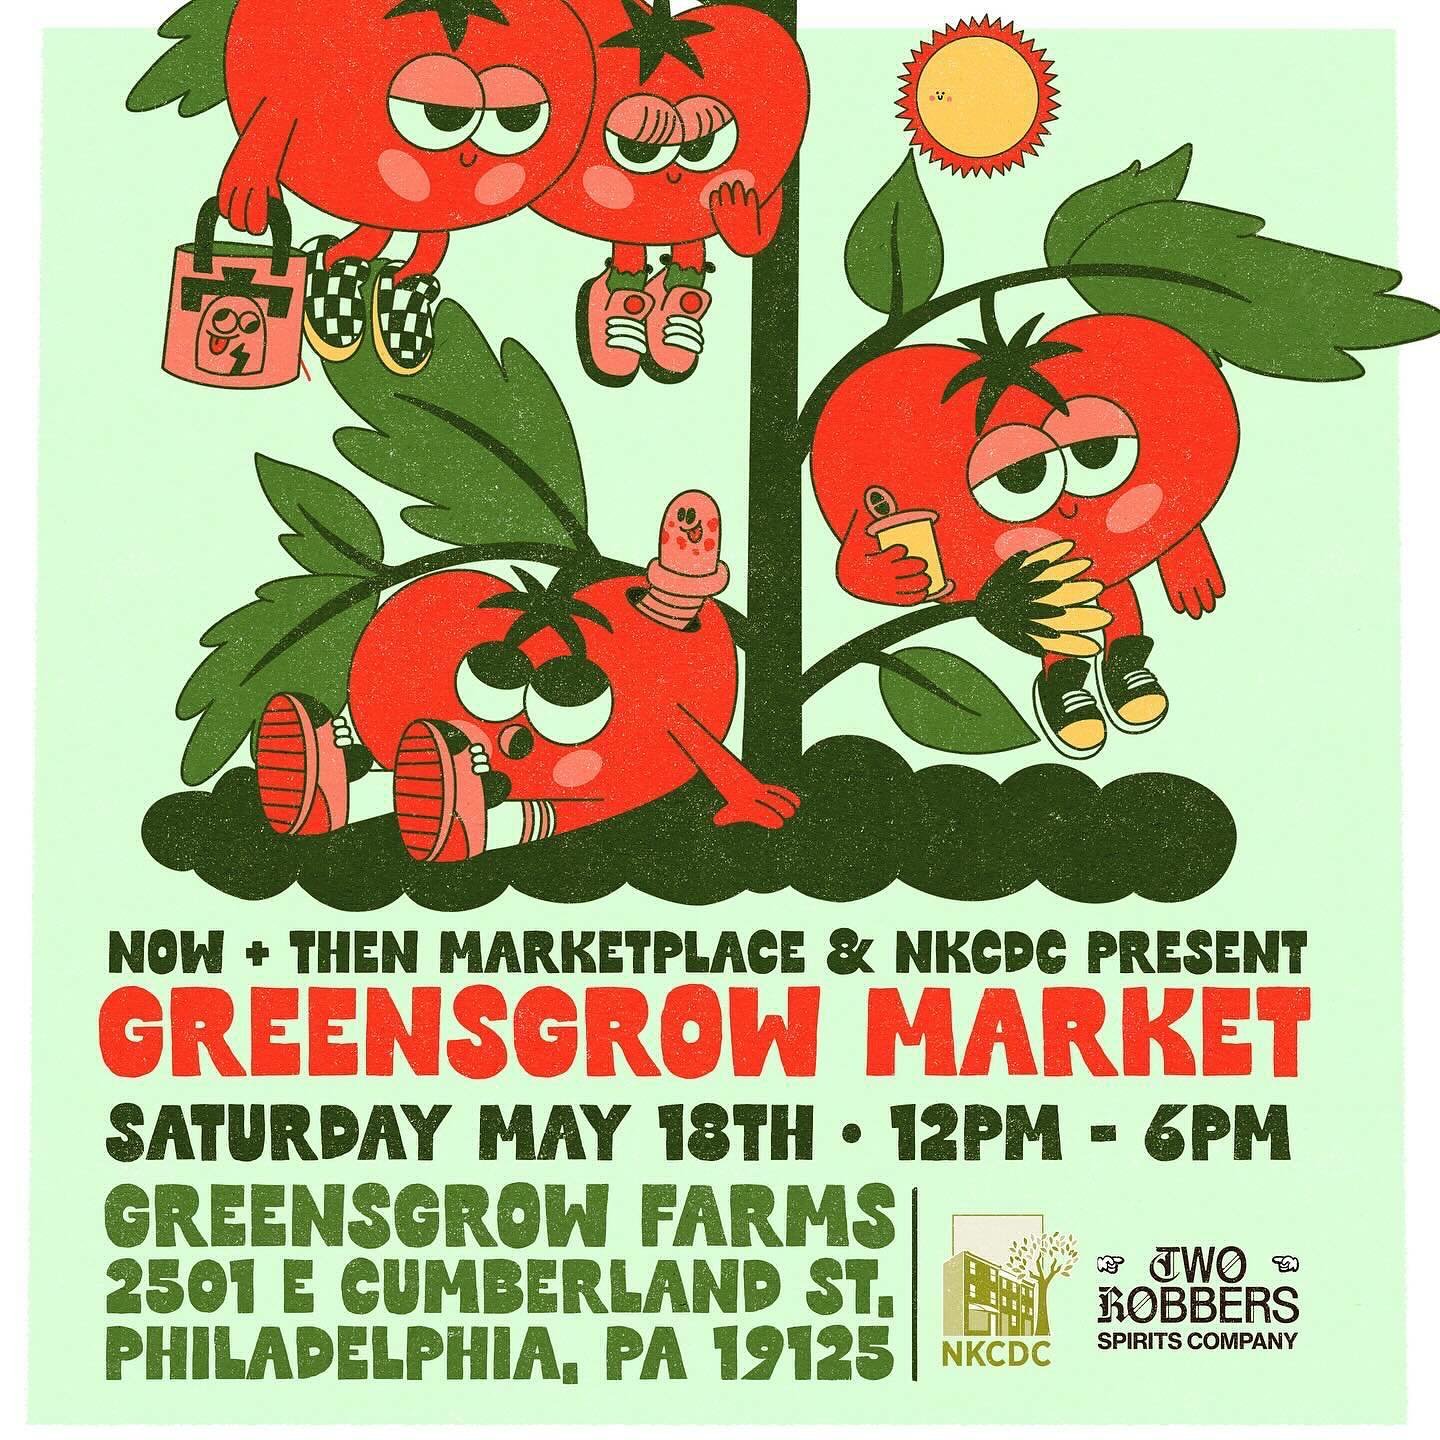 Stop &amp; smell the flowers while you shop over 60 local vendors THIS SATURDAY 5/18 at the recently reopened @greensgrow farm located at 2501 E Cumberland in Fishtown from Noon to 6pm 🌷🛍️ We have local drinks from @two_robbers 🍹 Music from DJ @li